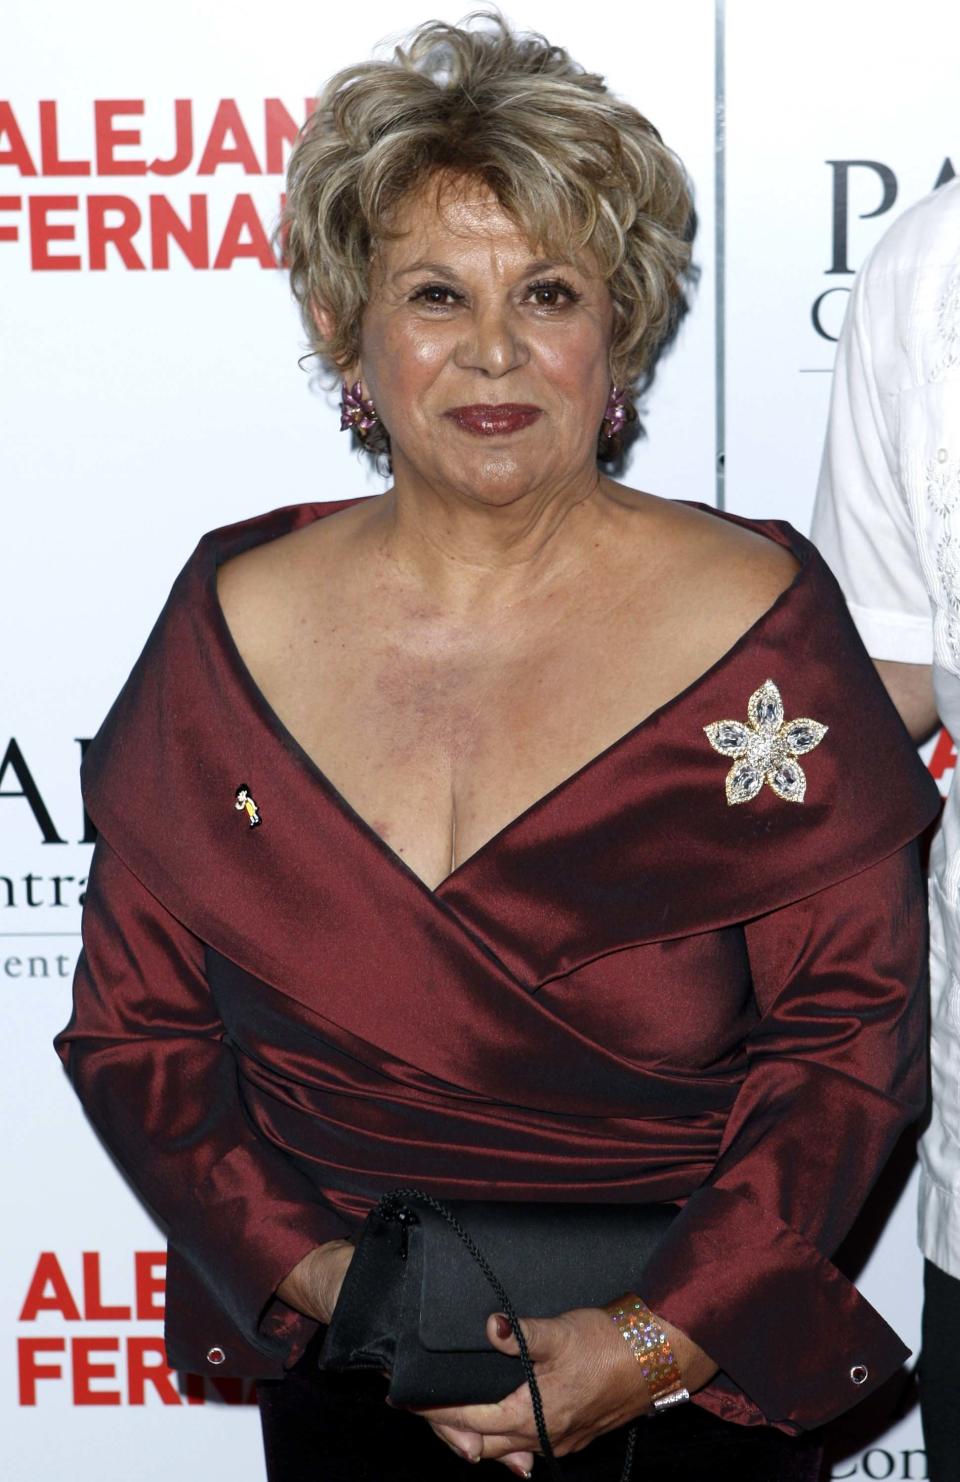 This Oct. 7, 2008 file photo shows actress Lupe Ontiveros at Padres Contra El Cancer's 8th annual "El Sueno de Esperanza" benefit gala in Los Angeles. Ontiveros, the popular Texan actress known for her portrayal of Yolanda Saldivar in "Selena," <a href="http://www.huffingtonpost.com/2012/07/27/lupe-ontiveros-dead-star-_n_1709783.html">died Thursday, July 26, 2012</a>, of cancer at the Presbyterian Hospital in the City of Whittier, Calif., according to friend and comedian Rick Najera. She was 69.